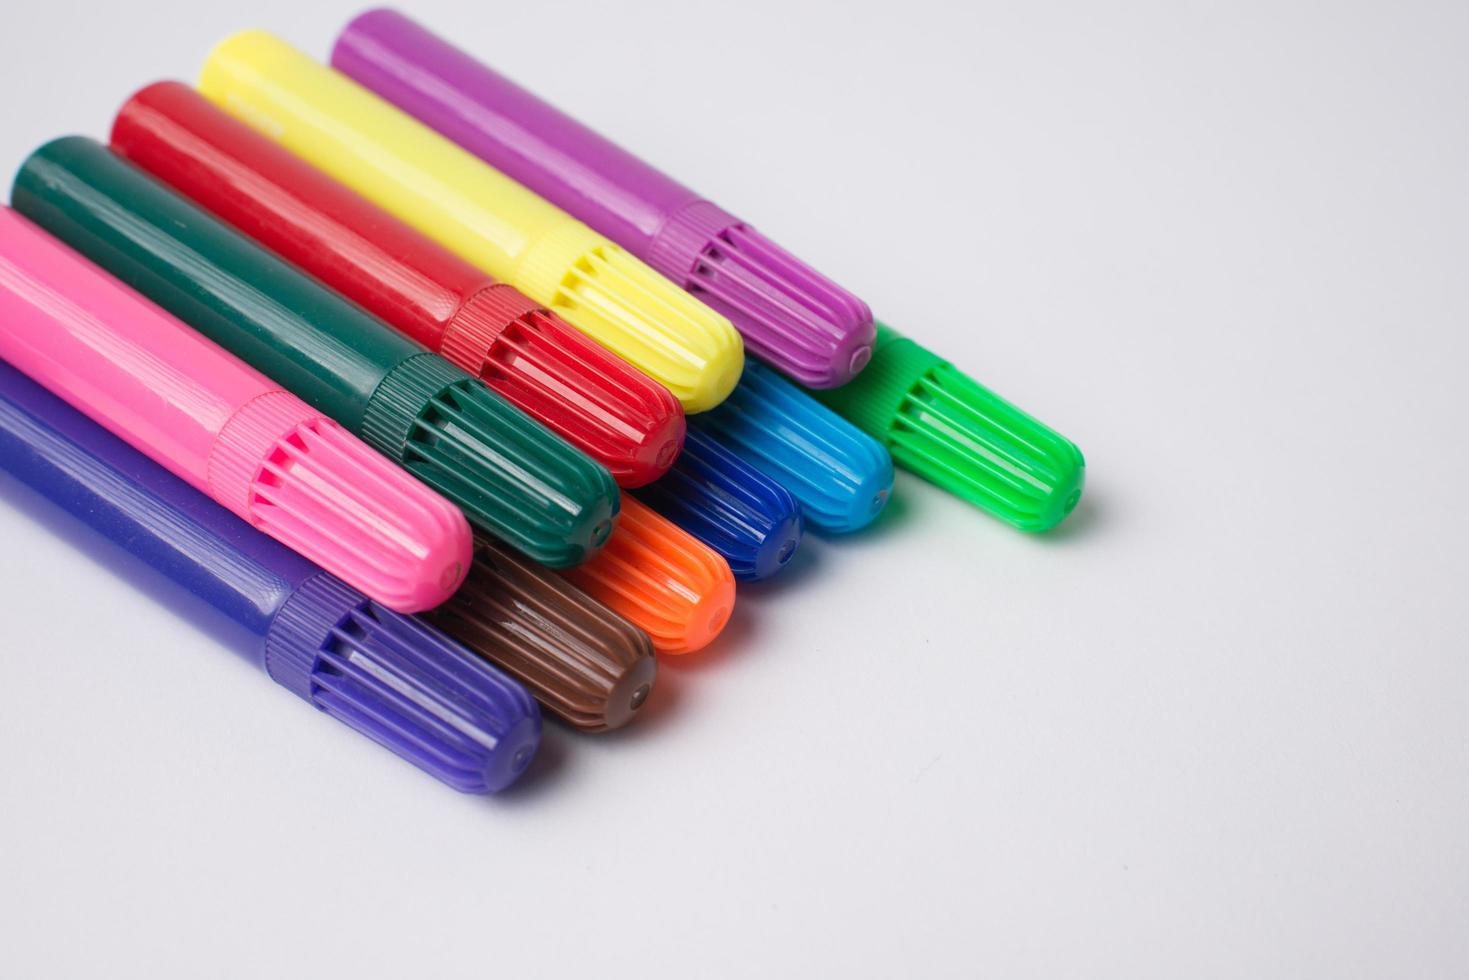 Pile of colorful markers on a white background photo